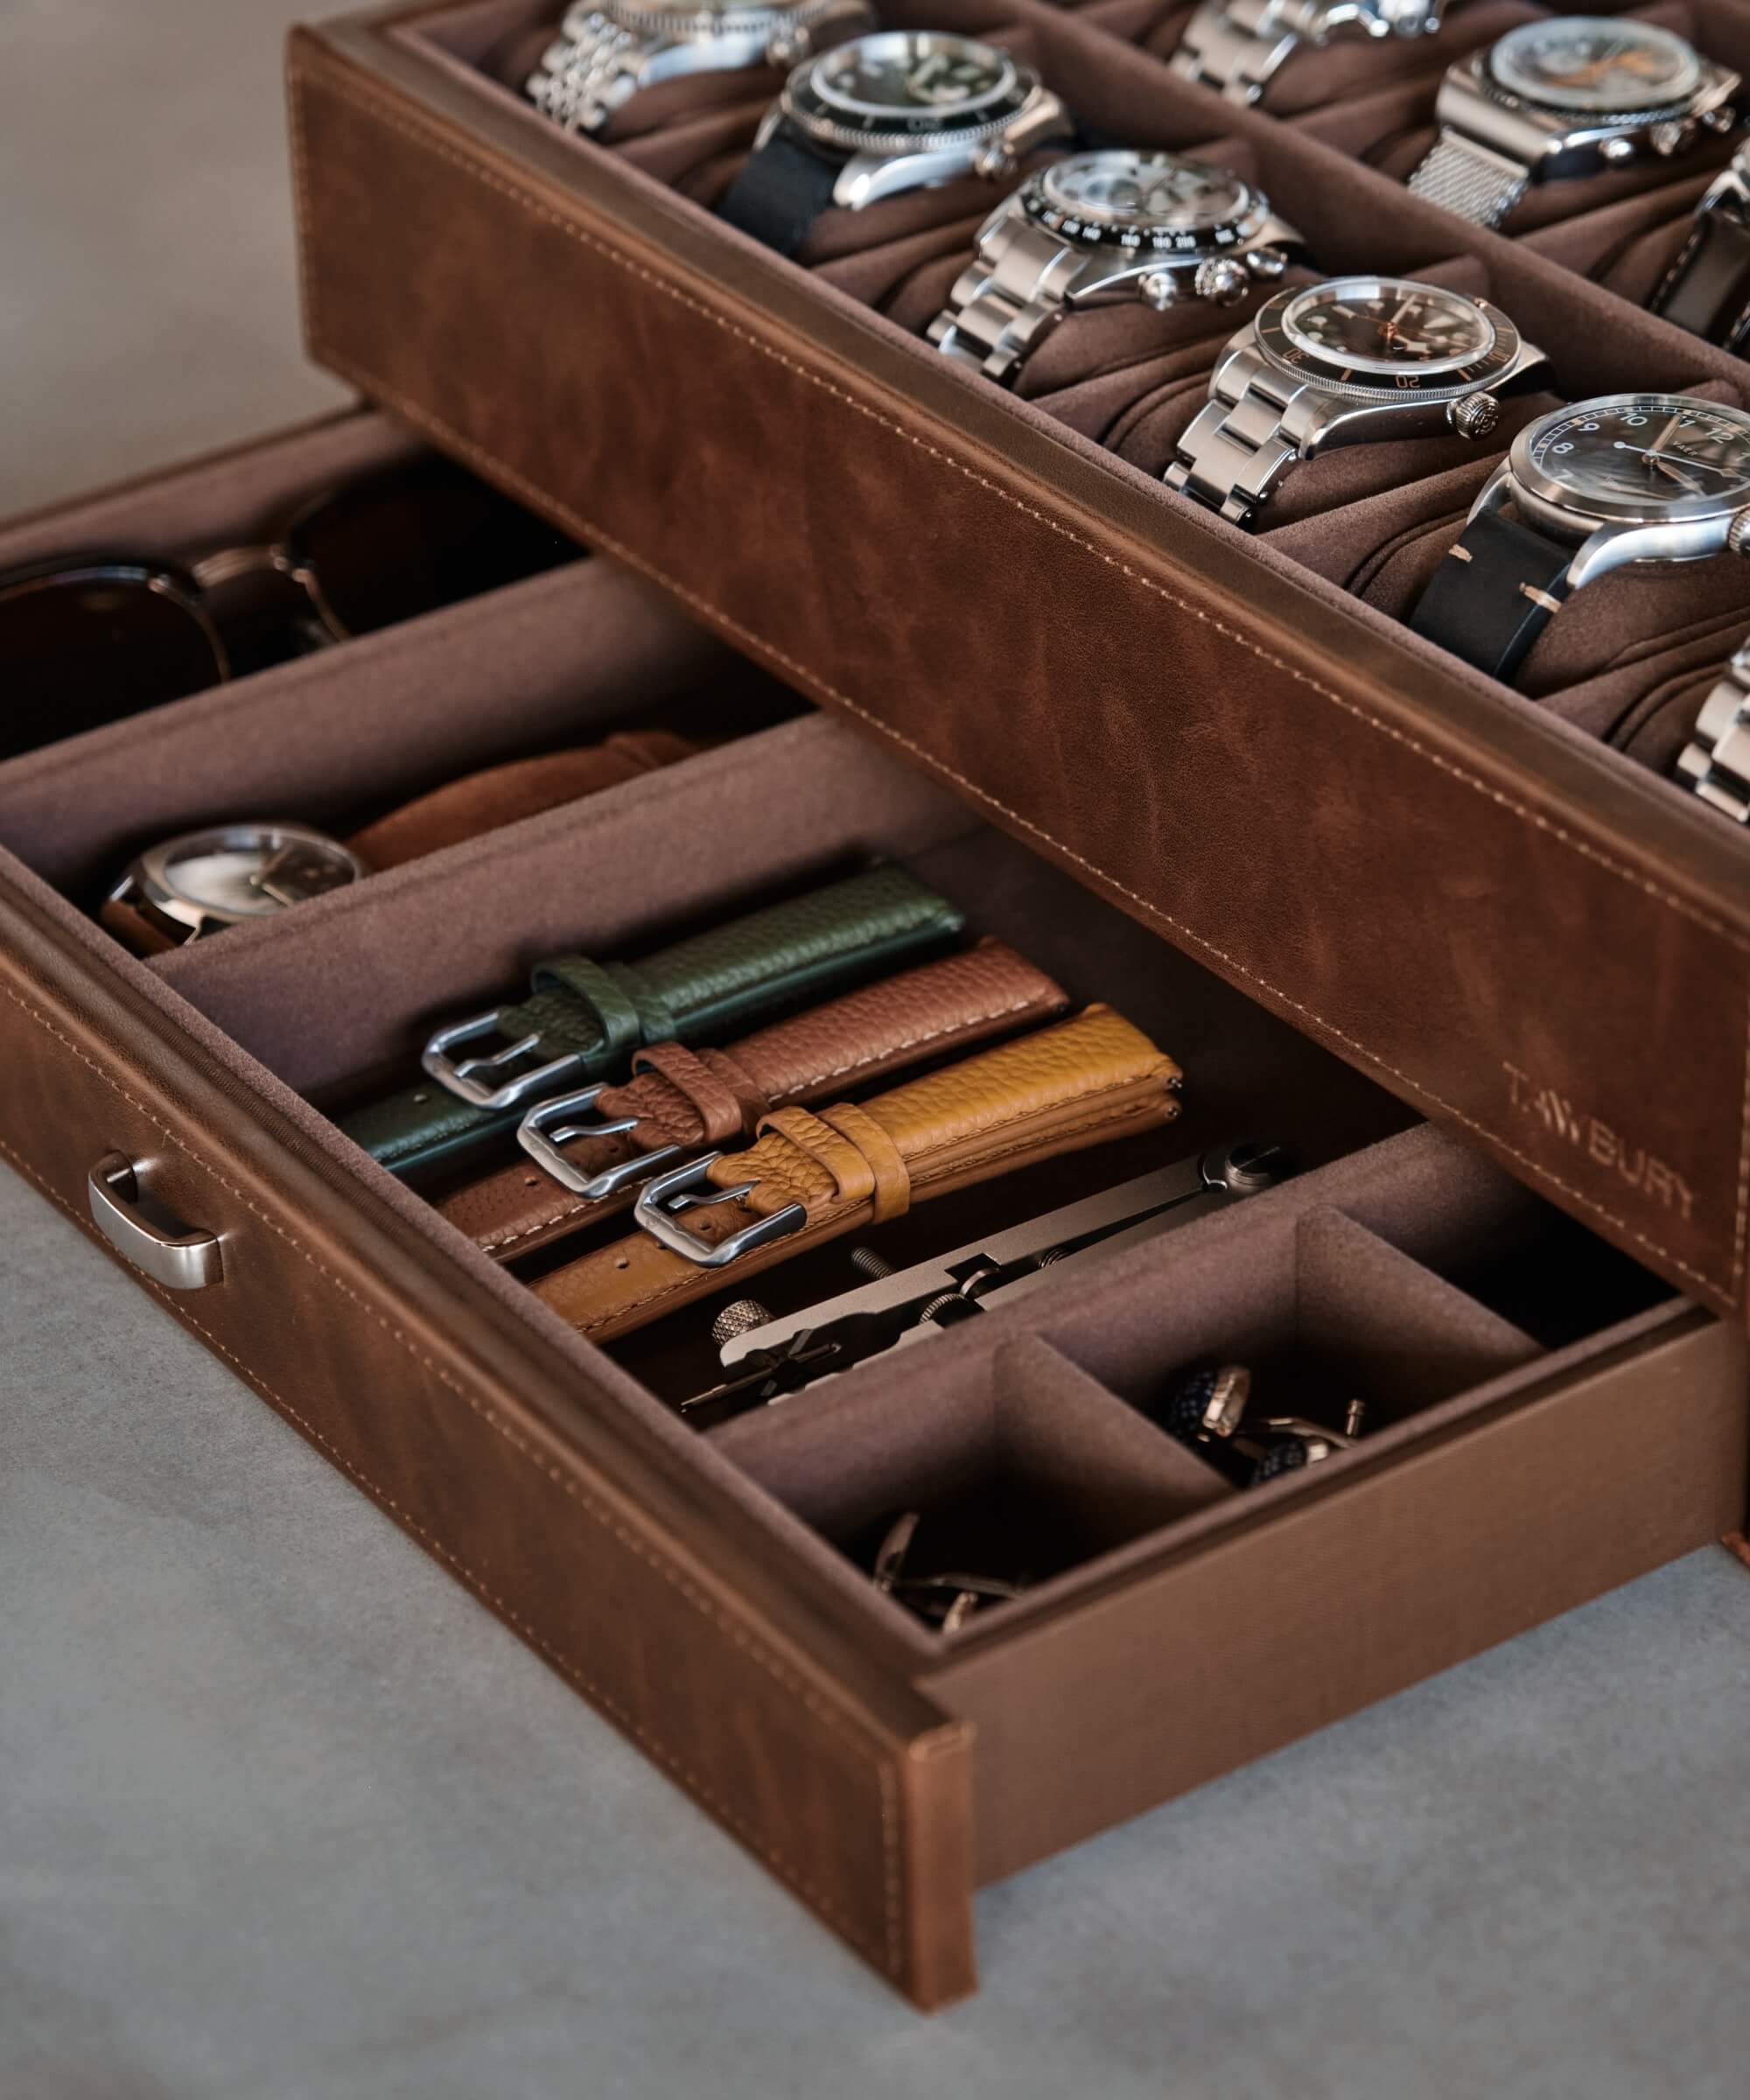 A TAWBURY Bayswater 12 Slot Watch Box with Drawer - Brown, providing storage for multiple timepieces.